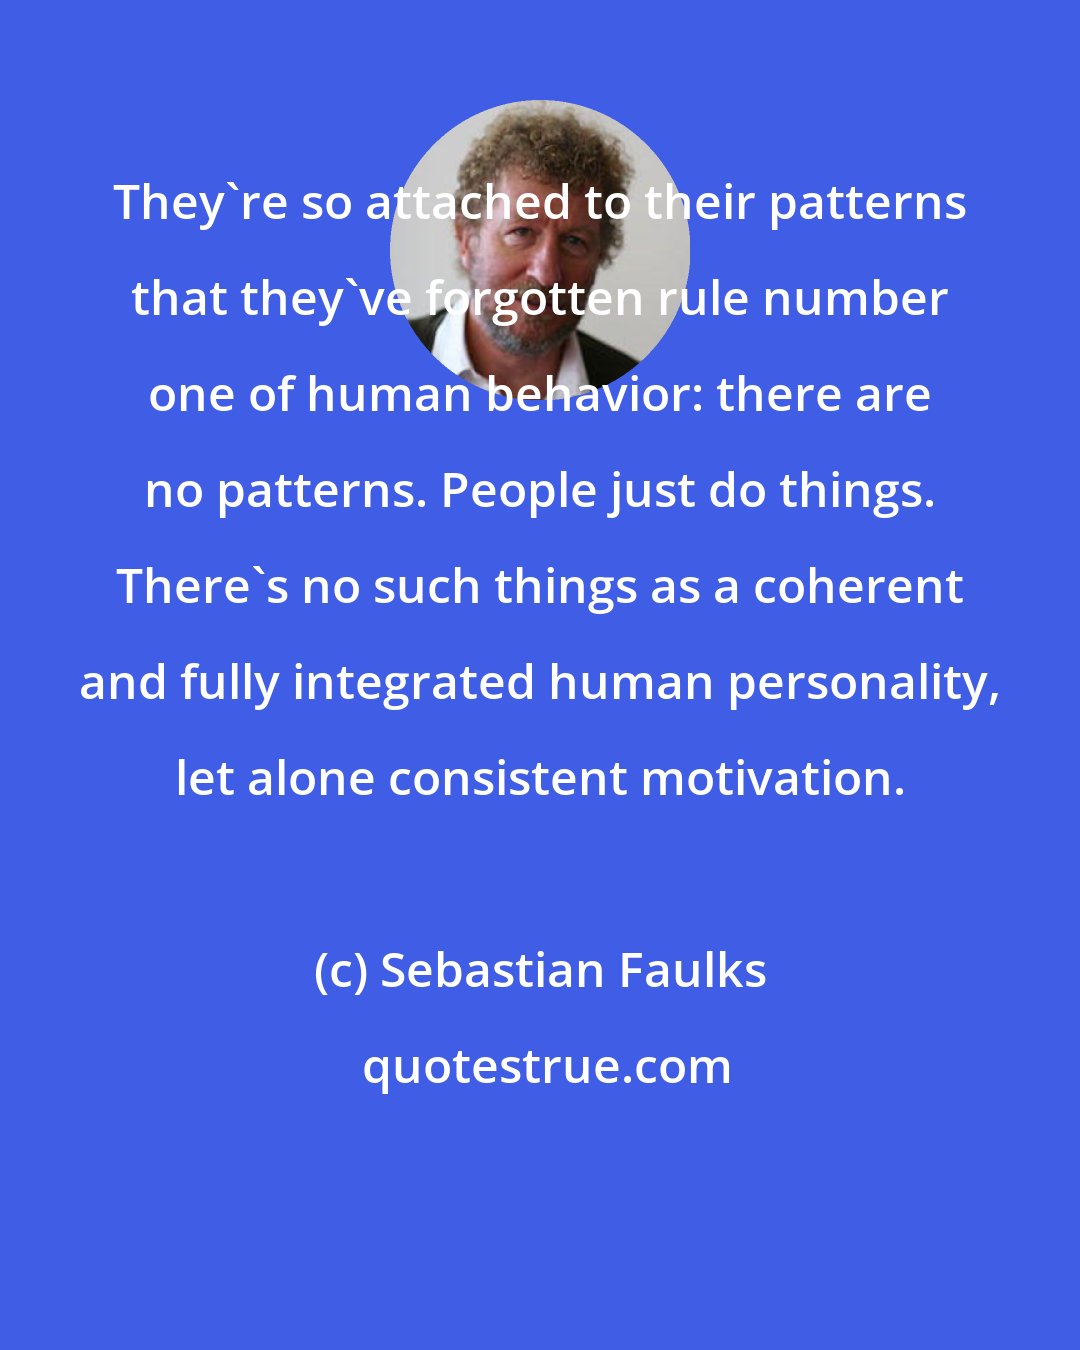 Sebastian Faulks: They're so attached to their patterns that they've forgotten rule number one of human behavior: there are no patterns. People just do things. There's no such things as a coherent and fully integrated human personality, let alone consistent motivation.